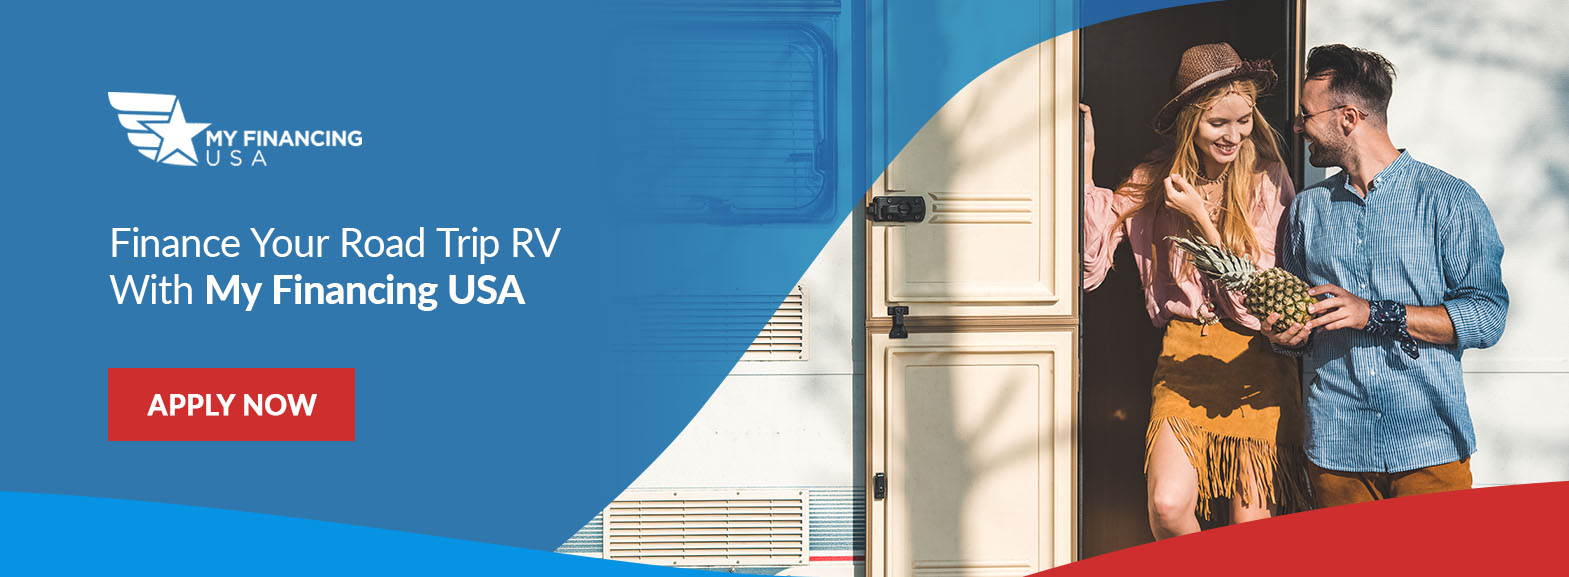 Finance Your Road Trip RV With My Financing USA. Apply now!